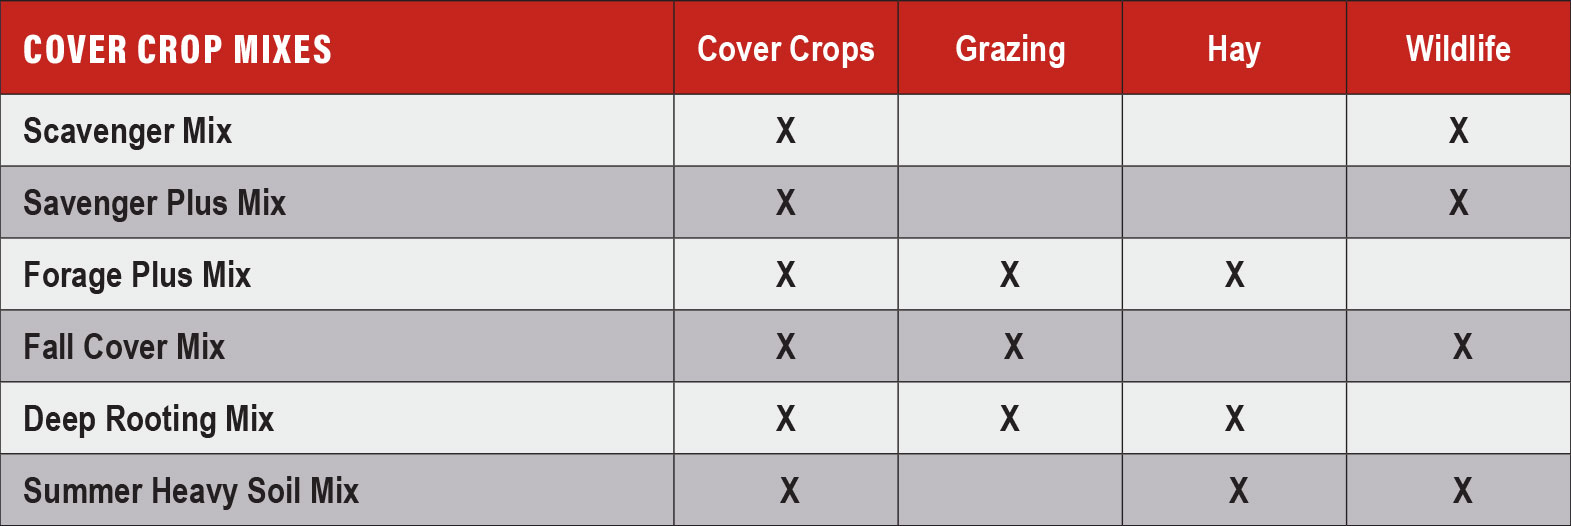 Small Seed - Cover Crop Mixes